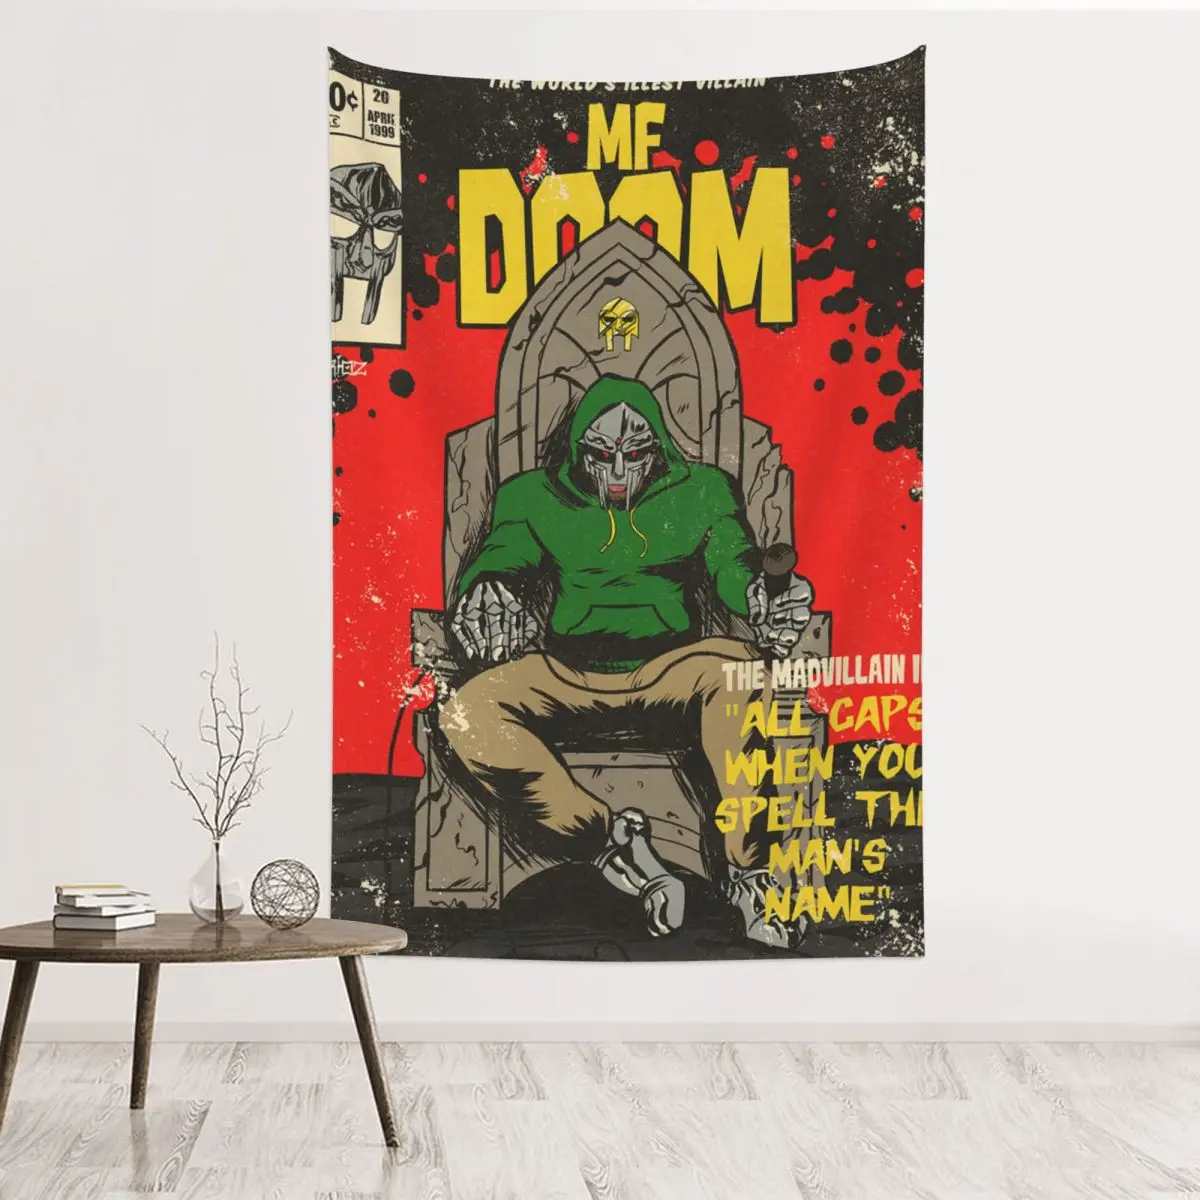 

All Caps Mf Doom Comic Tapestry Wall Hanging Hippie Tapestry Madvillain Art Wall Blanket Home Decor for Living Room Bedroom